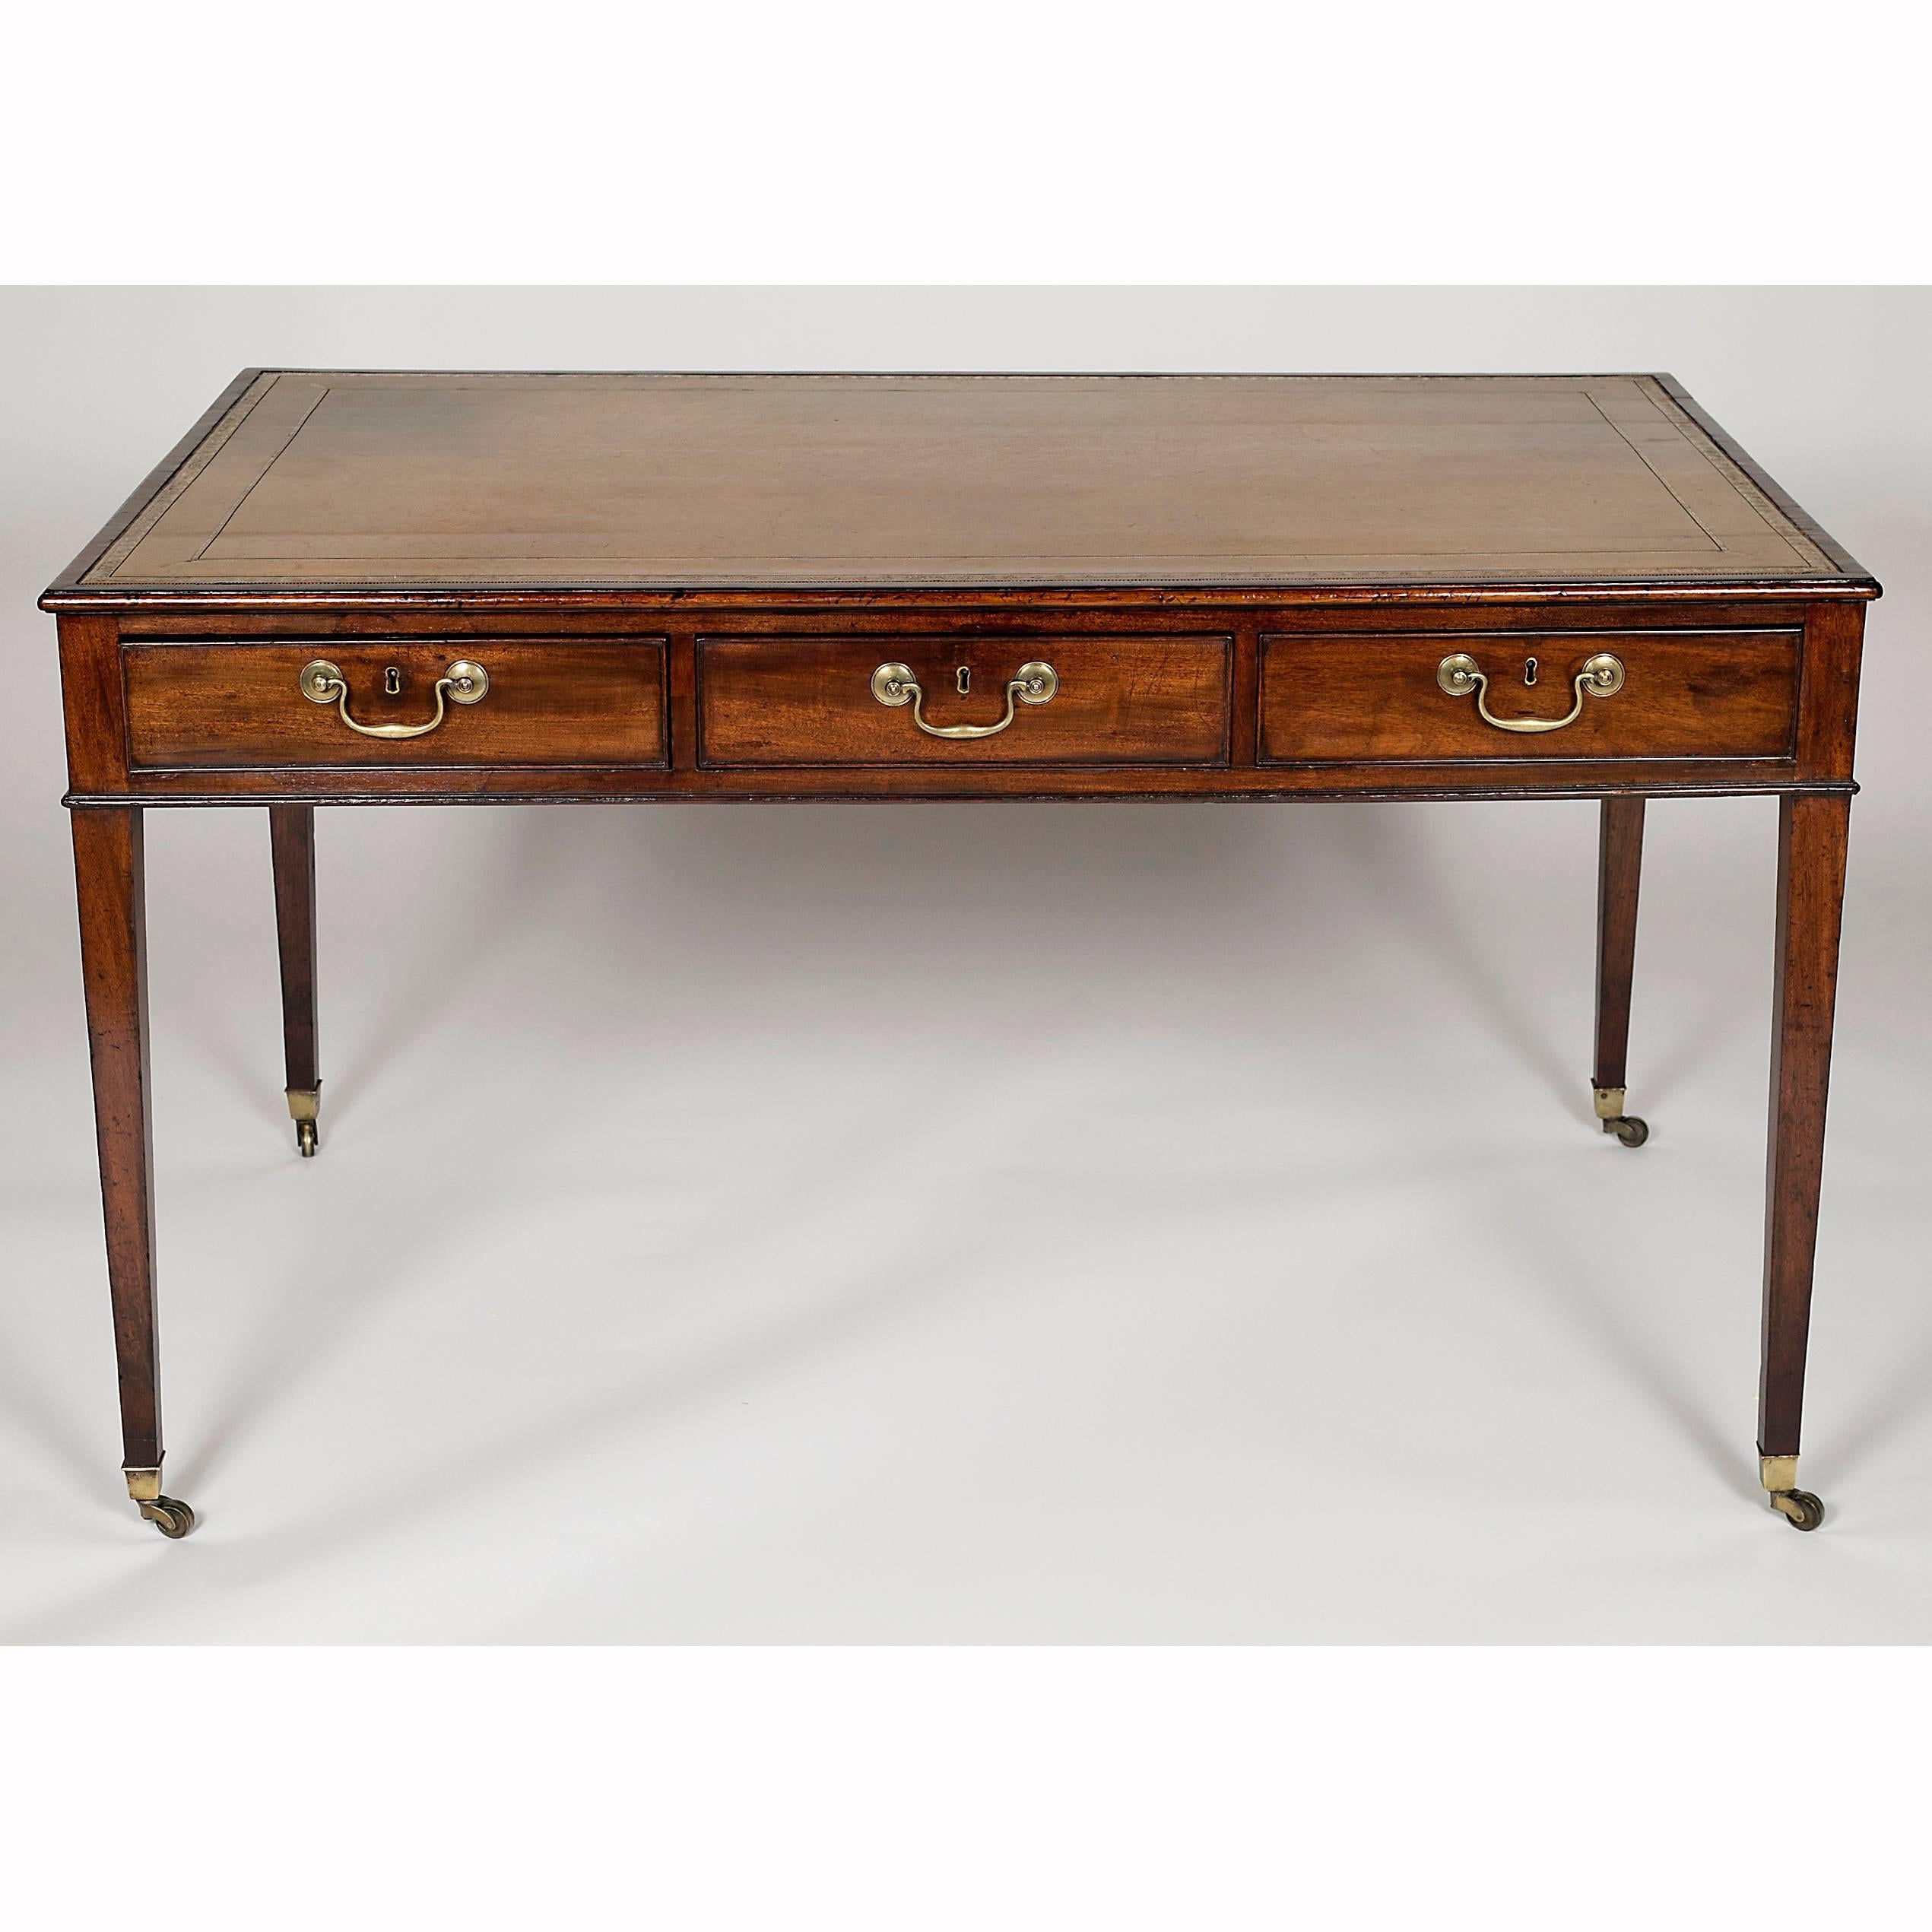 With gold color finely tooled rectangular leather top set in conforming crossbanded top over three drawers with brass bail handles and opposing false drawers raised on square tapered legs ending on brass cup casters.